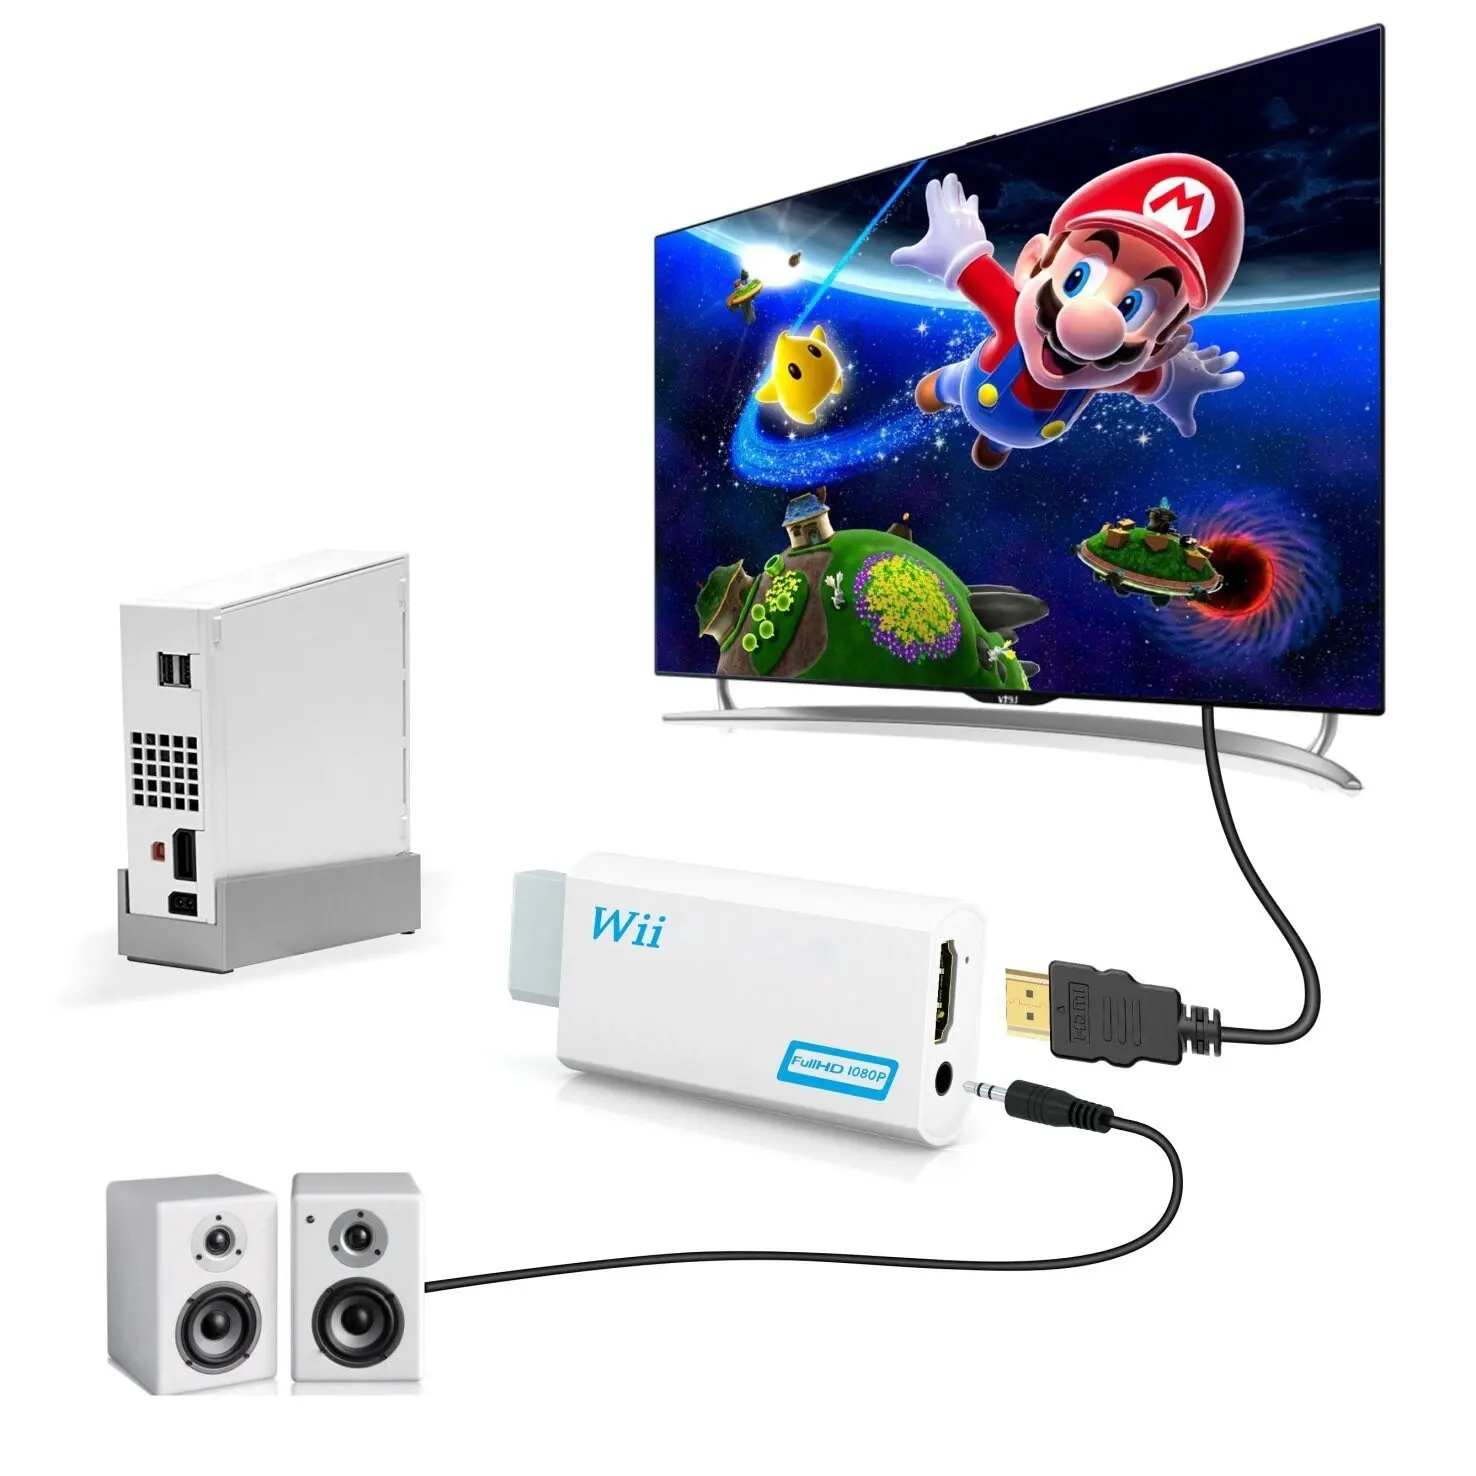 Full HD 1080P Wii to HDMI Compatible Converter Adapter Wii2HDMI Converter 3.5mm Audio for PC HDTV Monitor Display images - 6